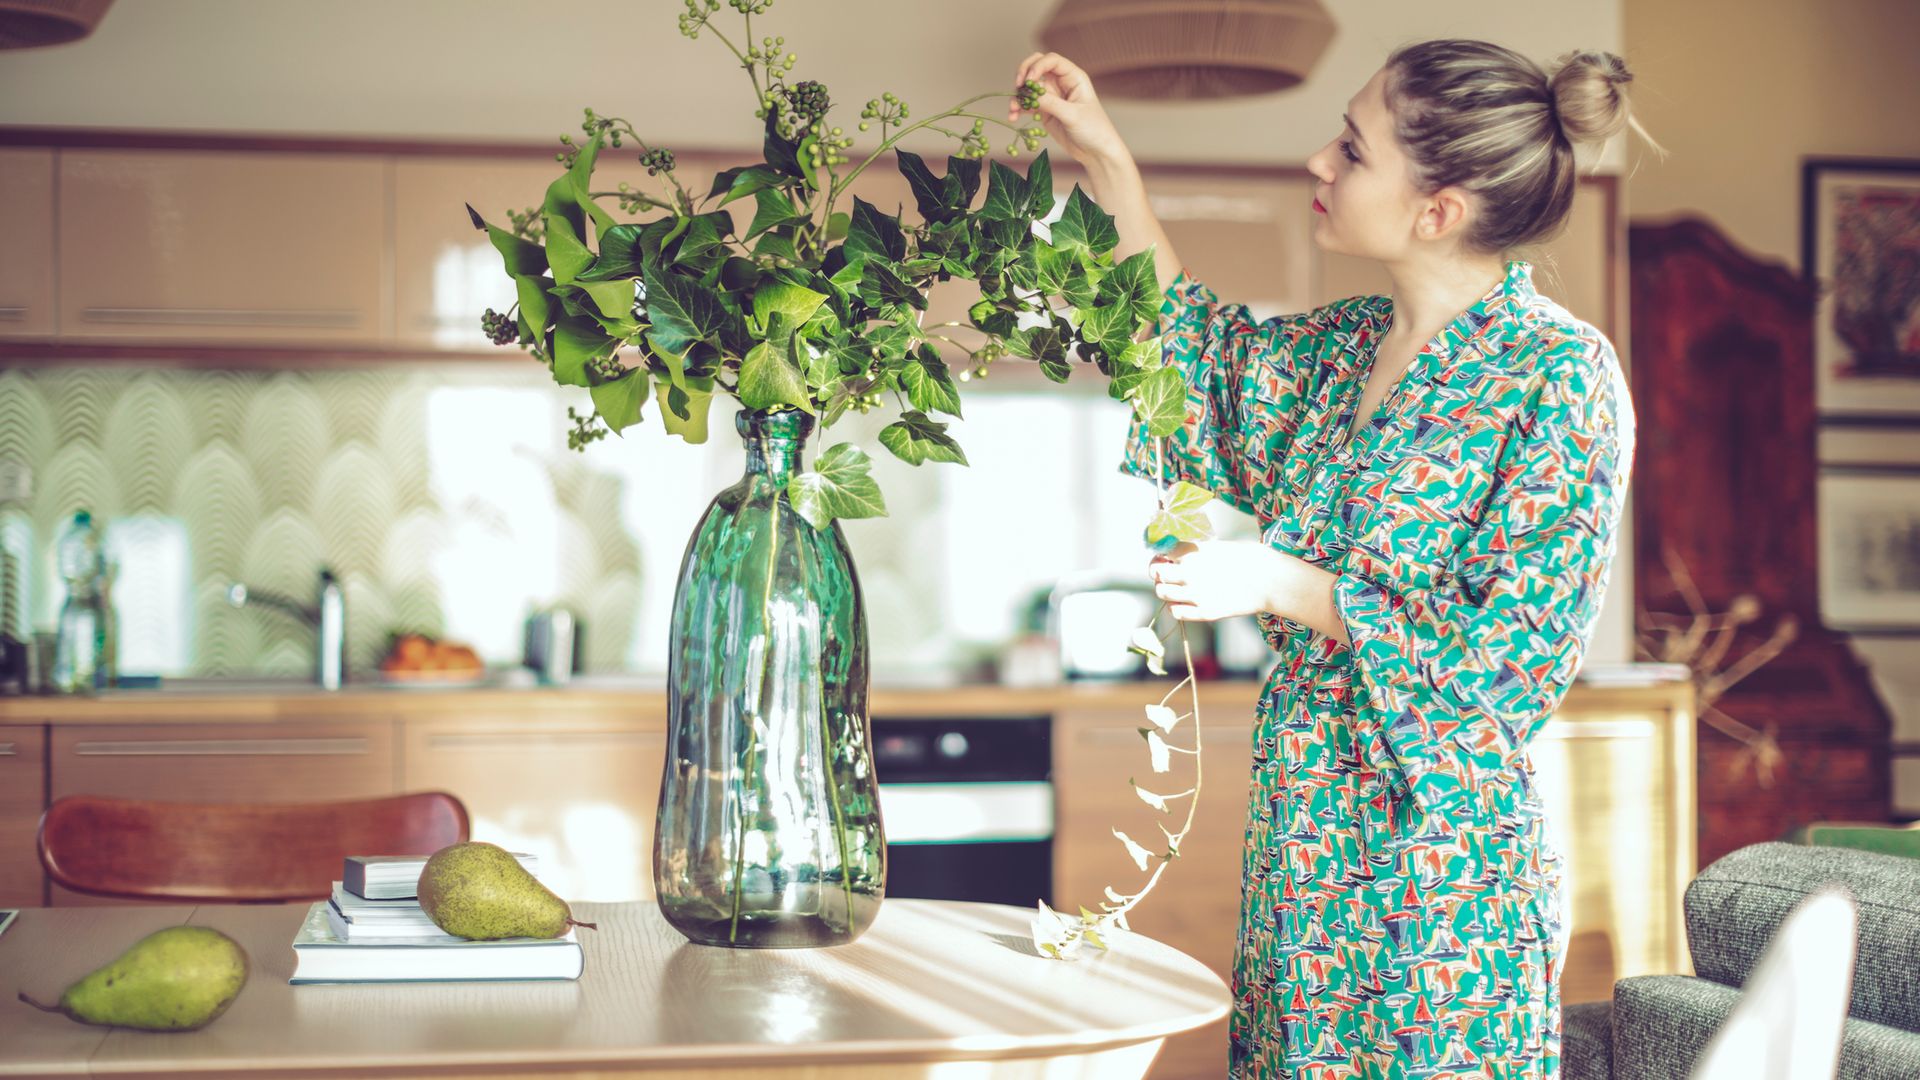 Young woman at home tending to flowers